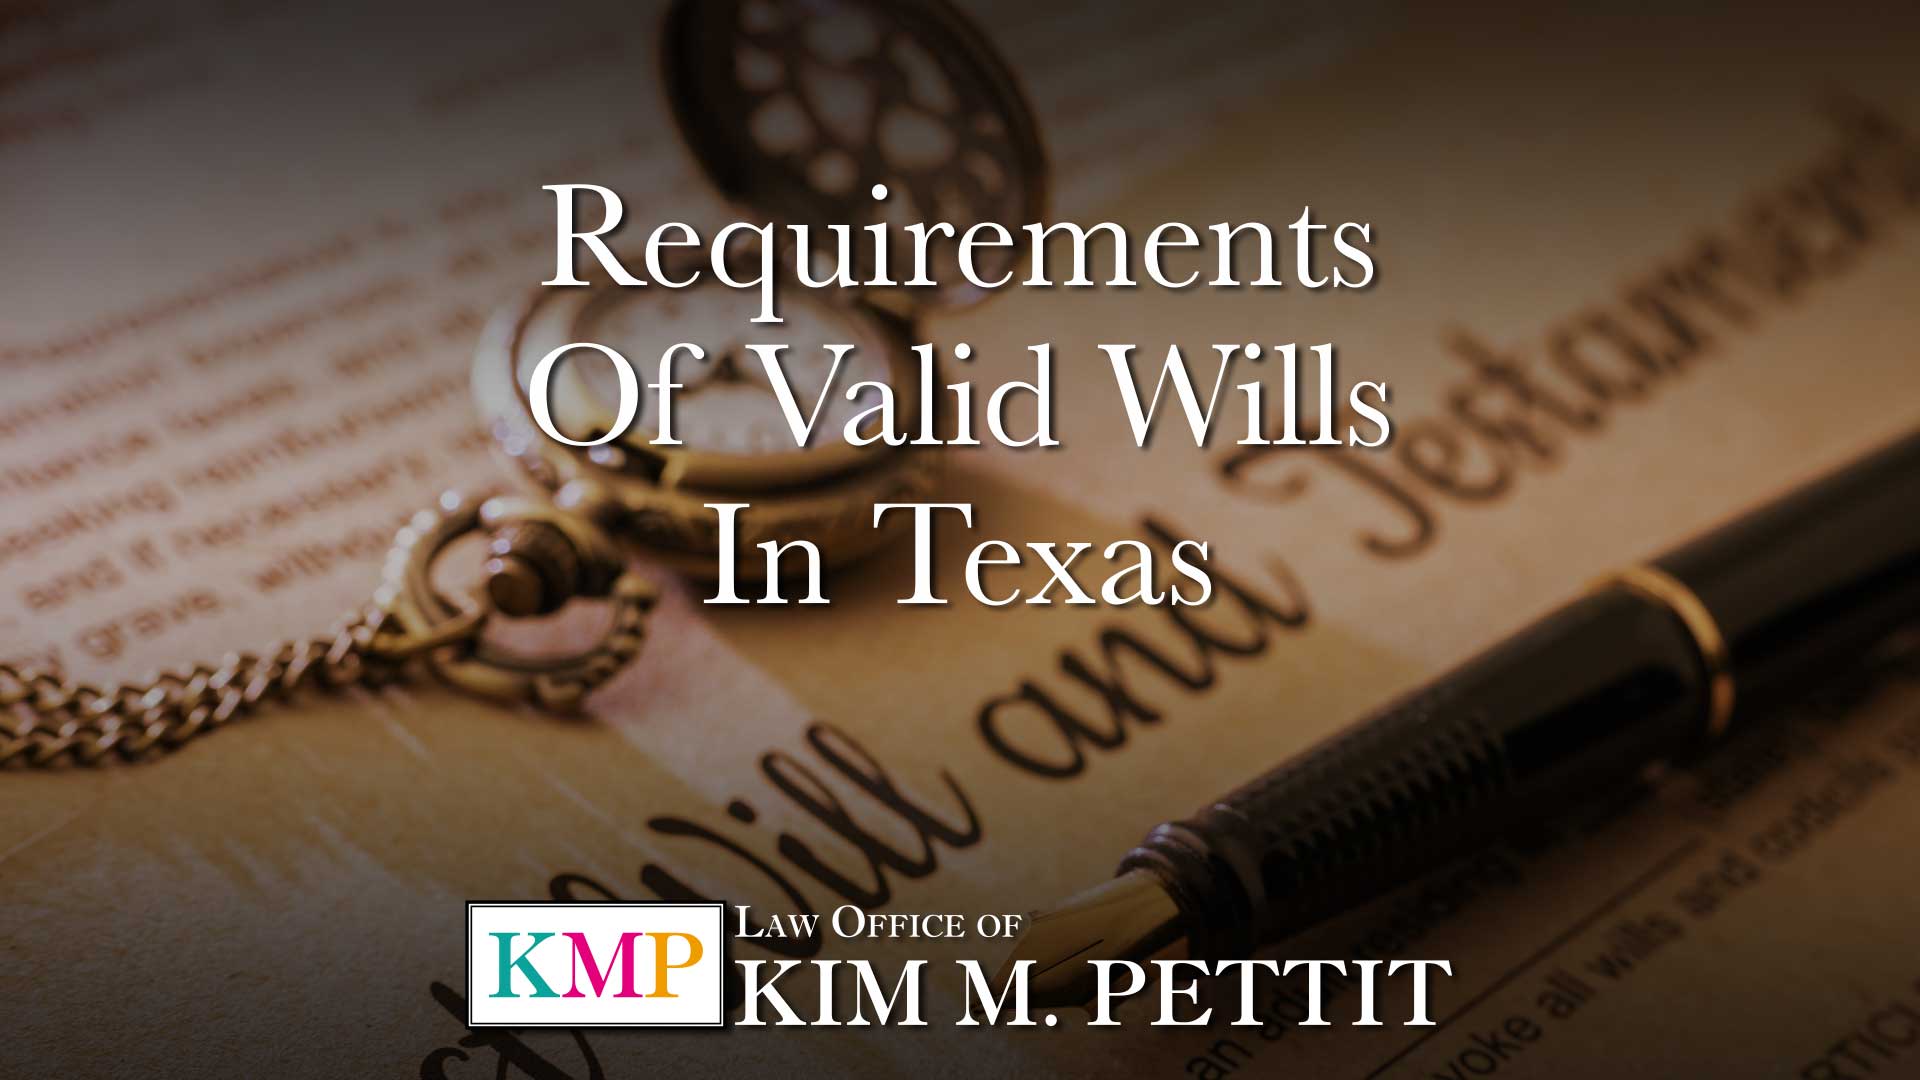 Requirements of Valid Wills in Texas